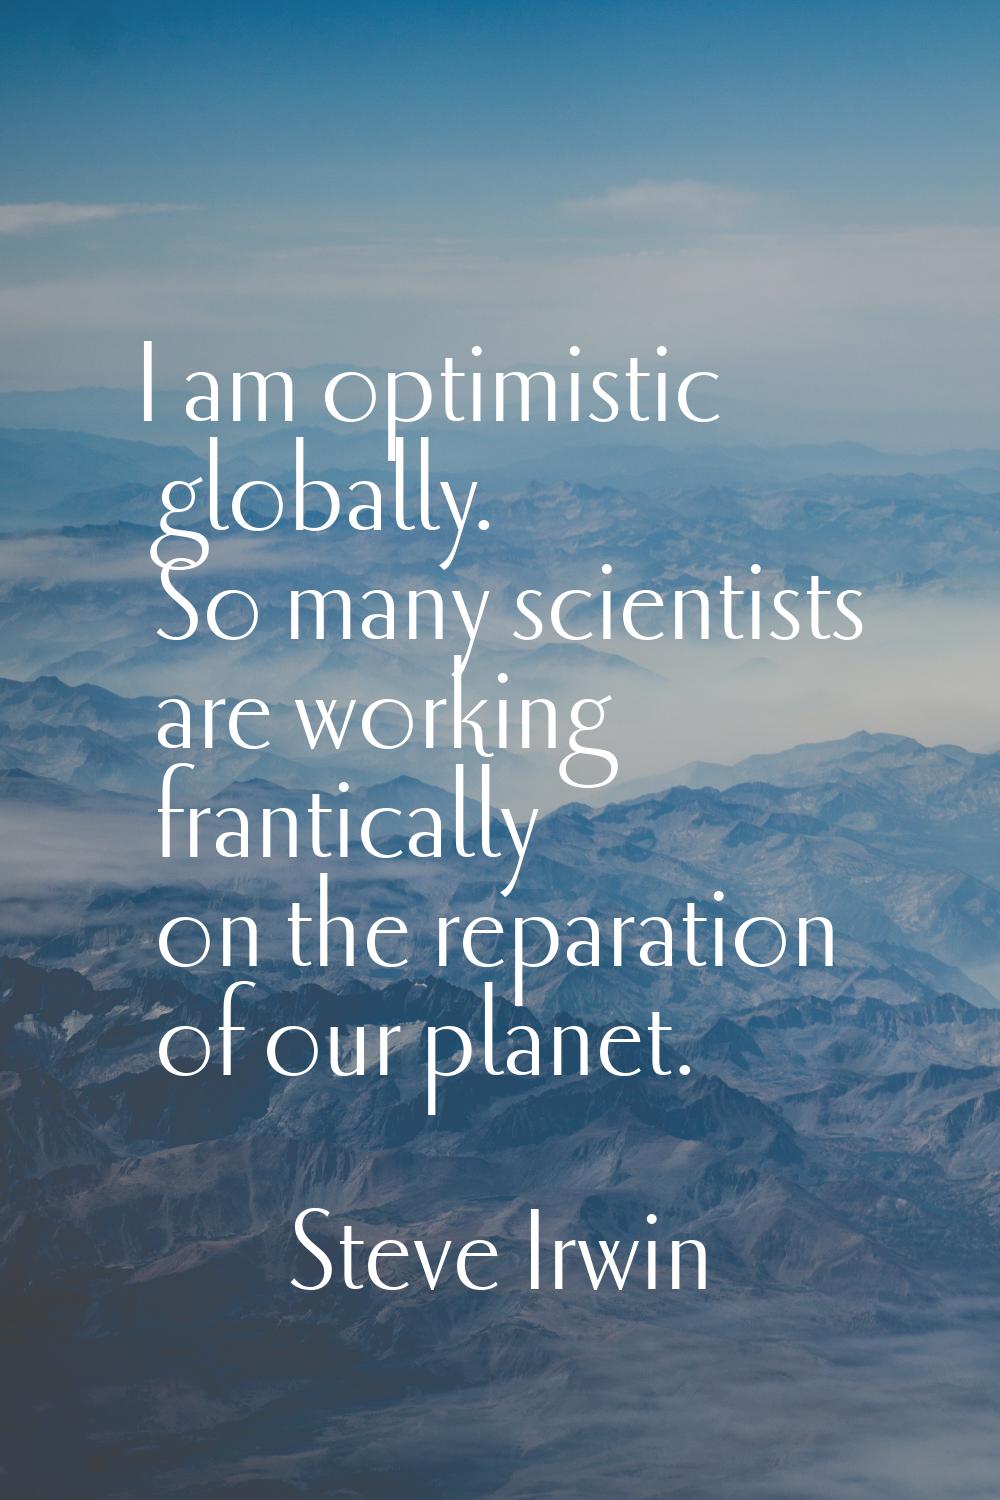 I am optimistic globally. So many scientists are working frantically on the reparation of our plane